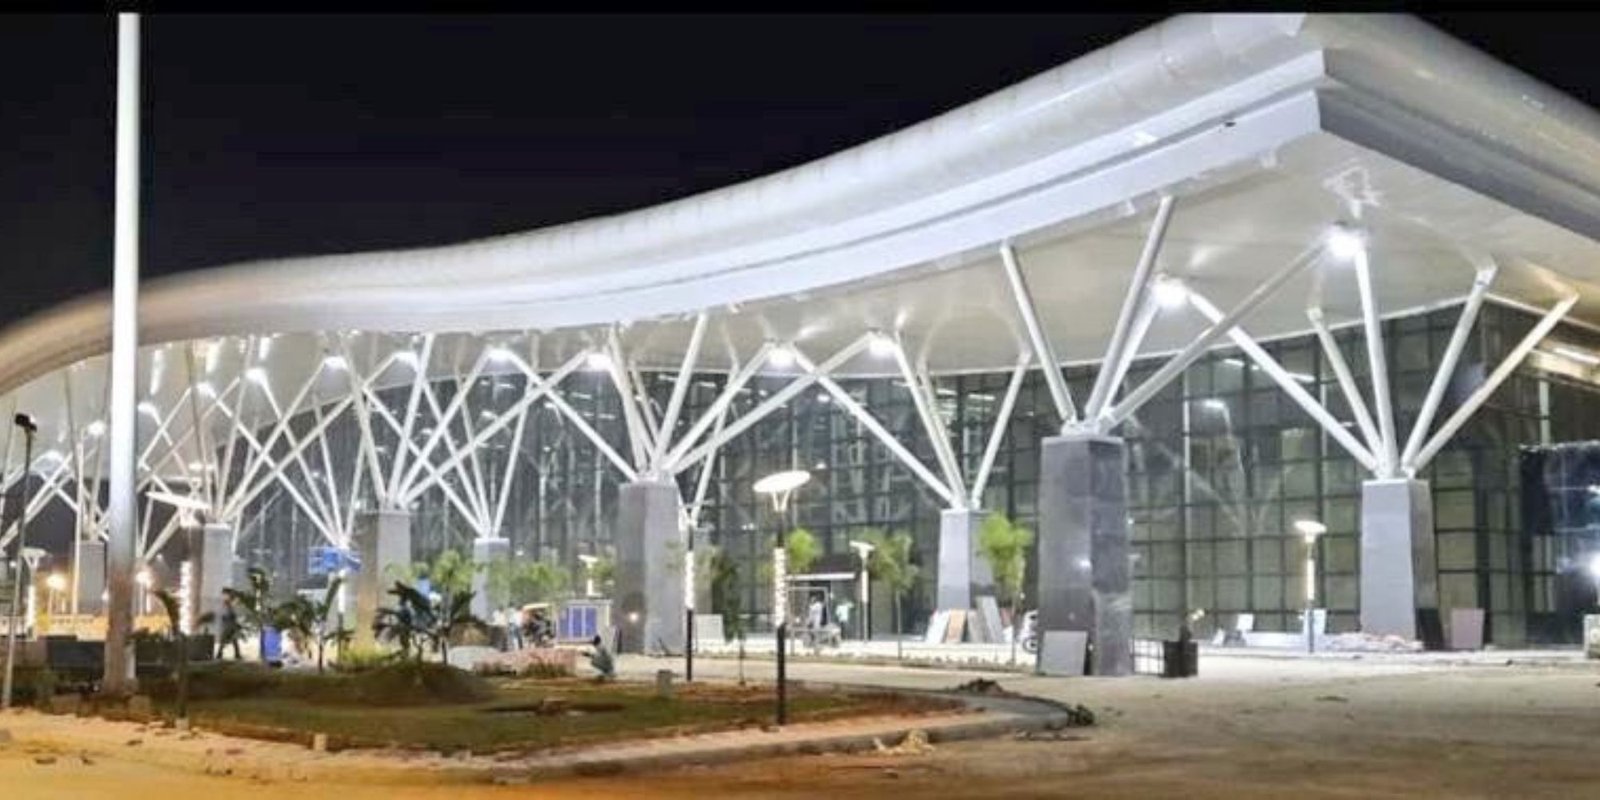 Indian Railways Go Modern – Bengaluru Station is India’s first centralized AC Station On The Lines Of Airport